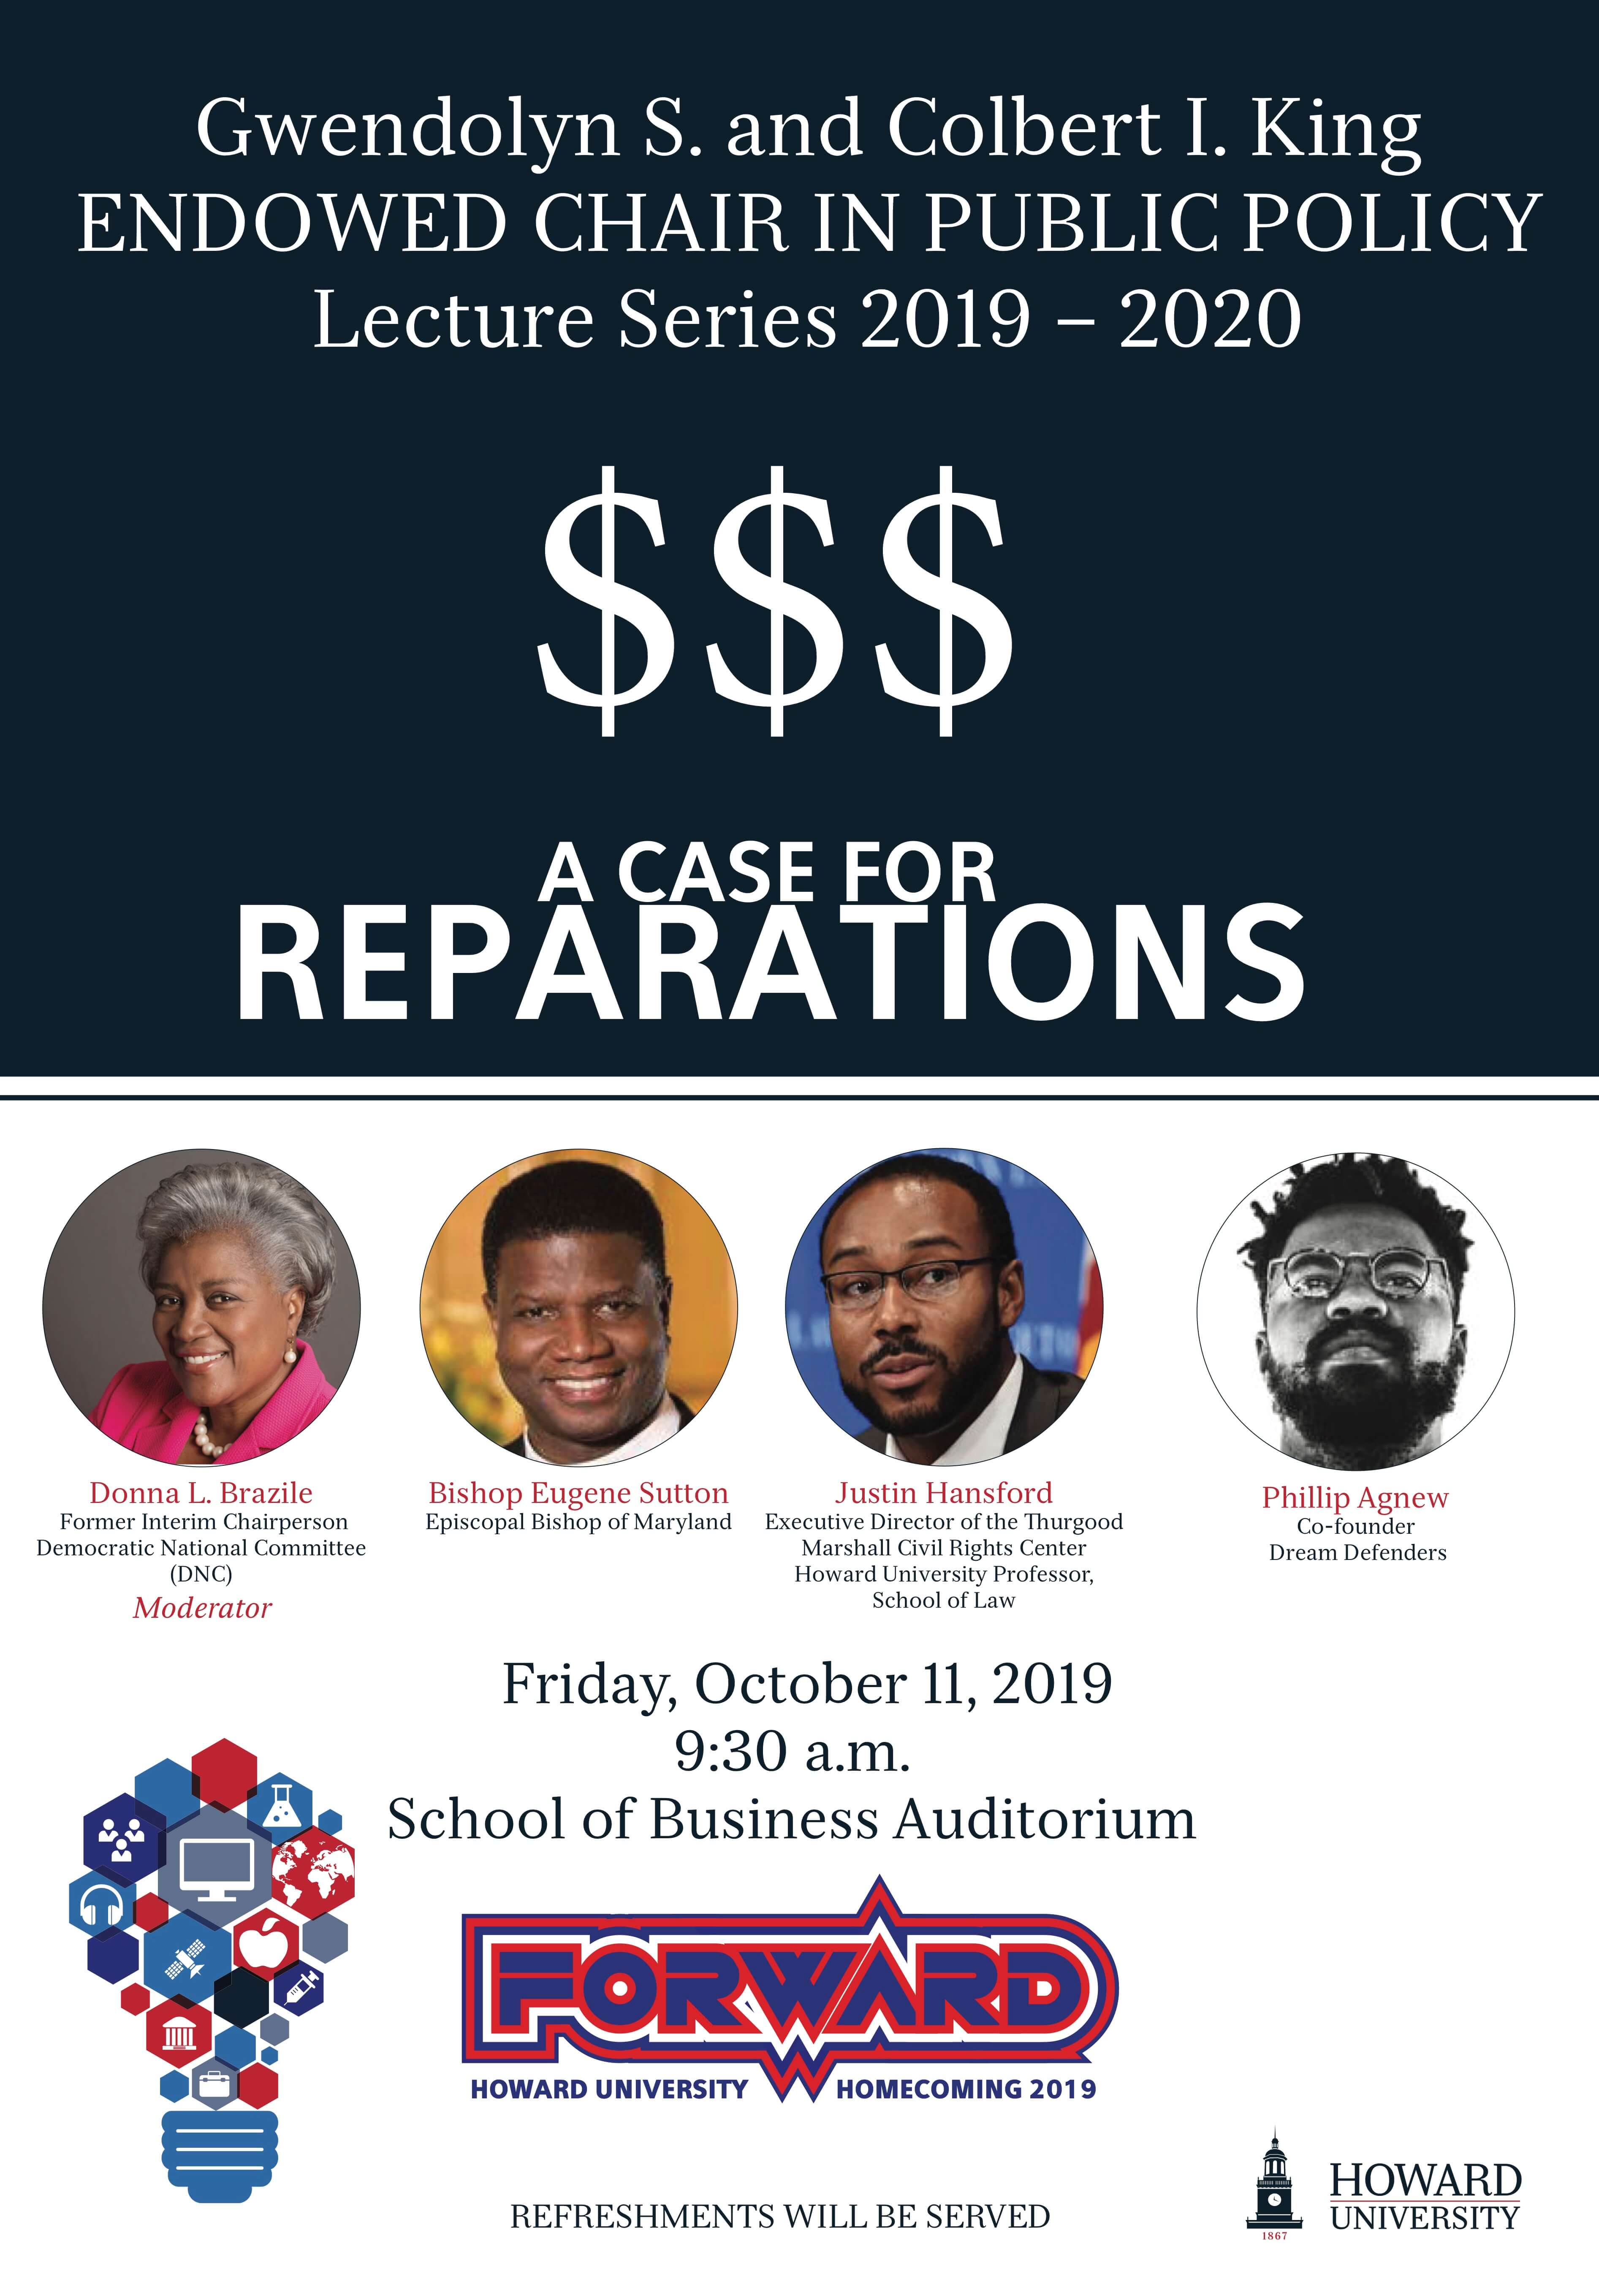 King Lecture Series : The Case for Reparations at Howard University HU Ideas Symposium on Oct 11 at 9:30am